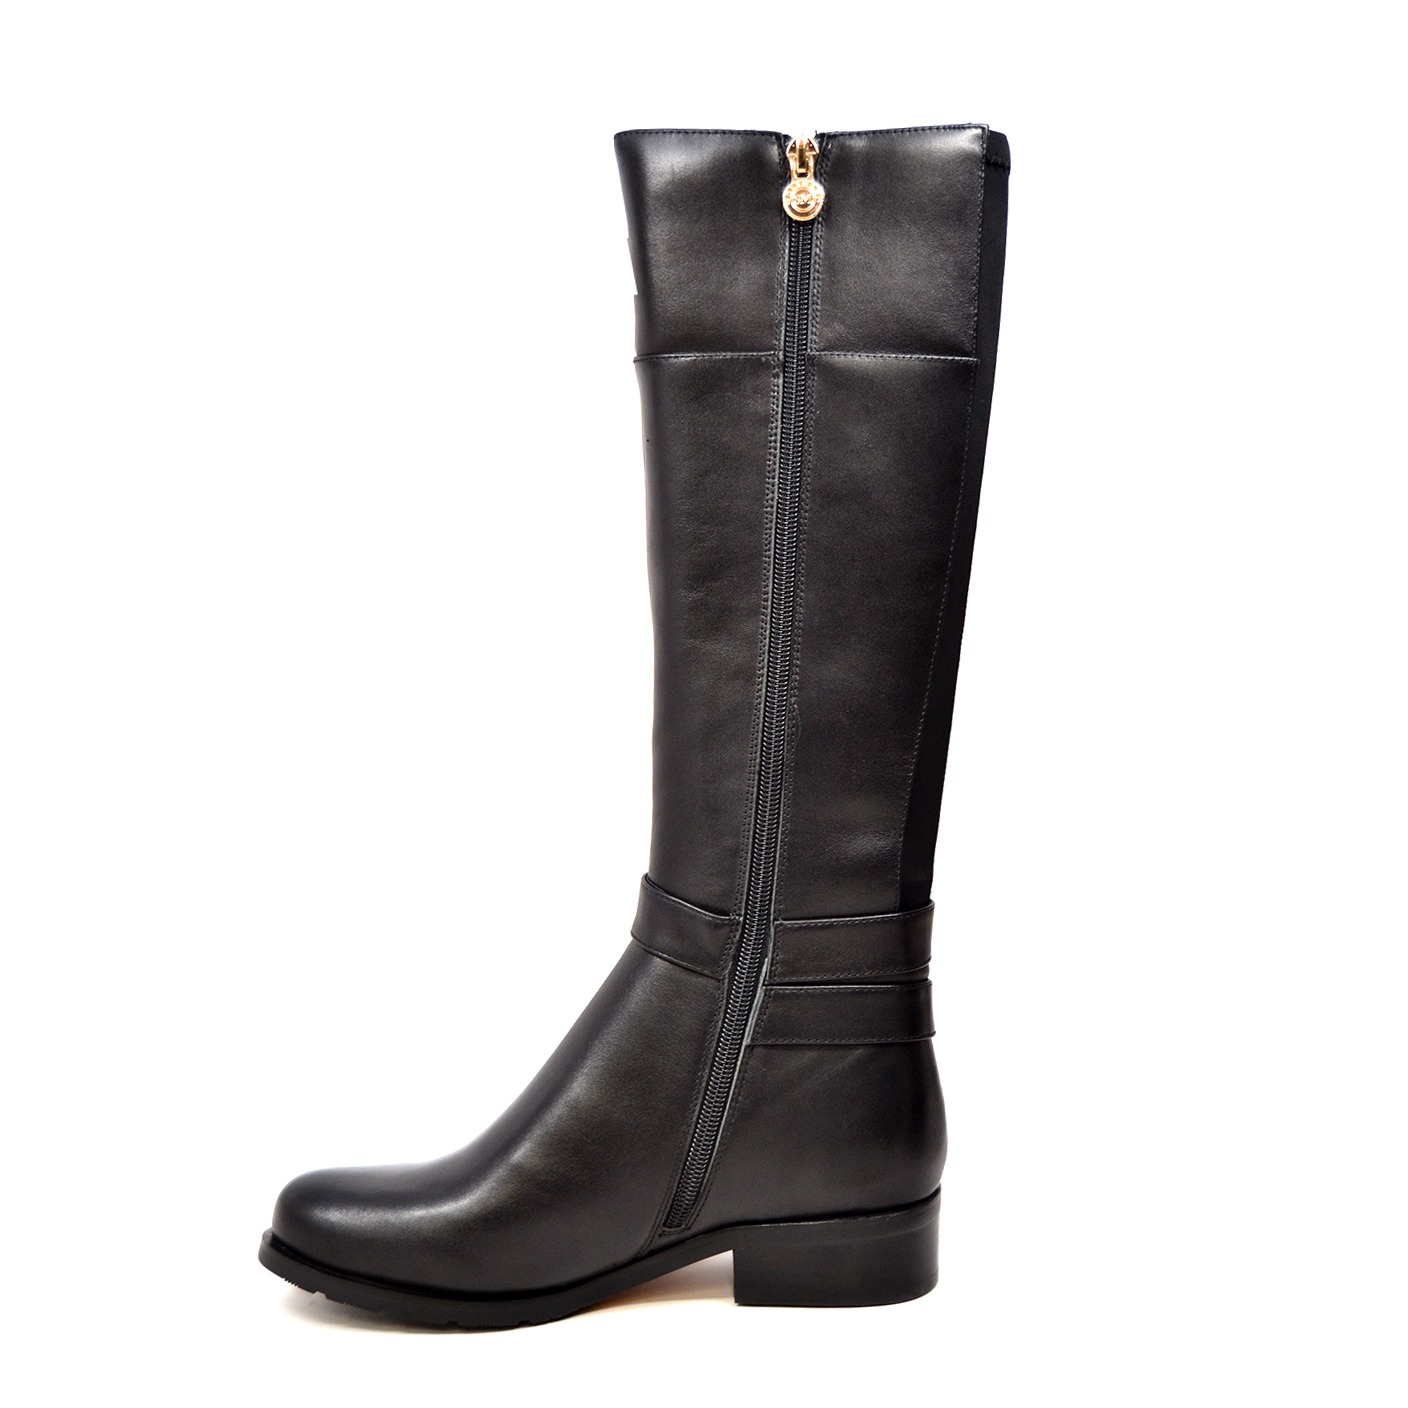 women's riding boots for small calves